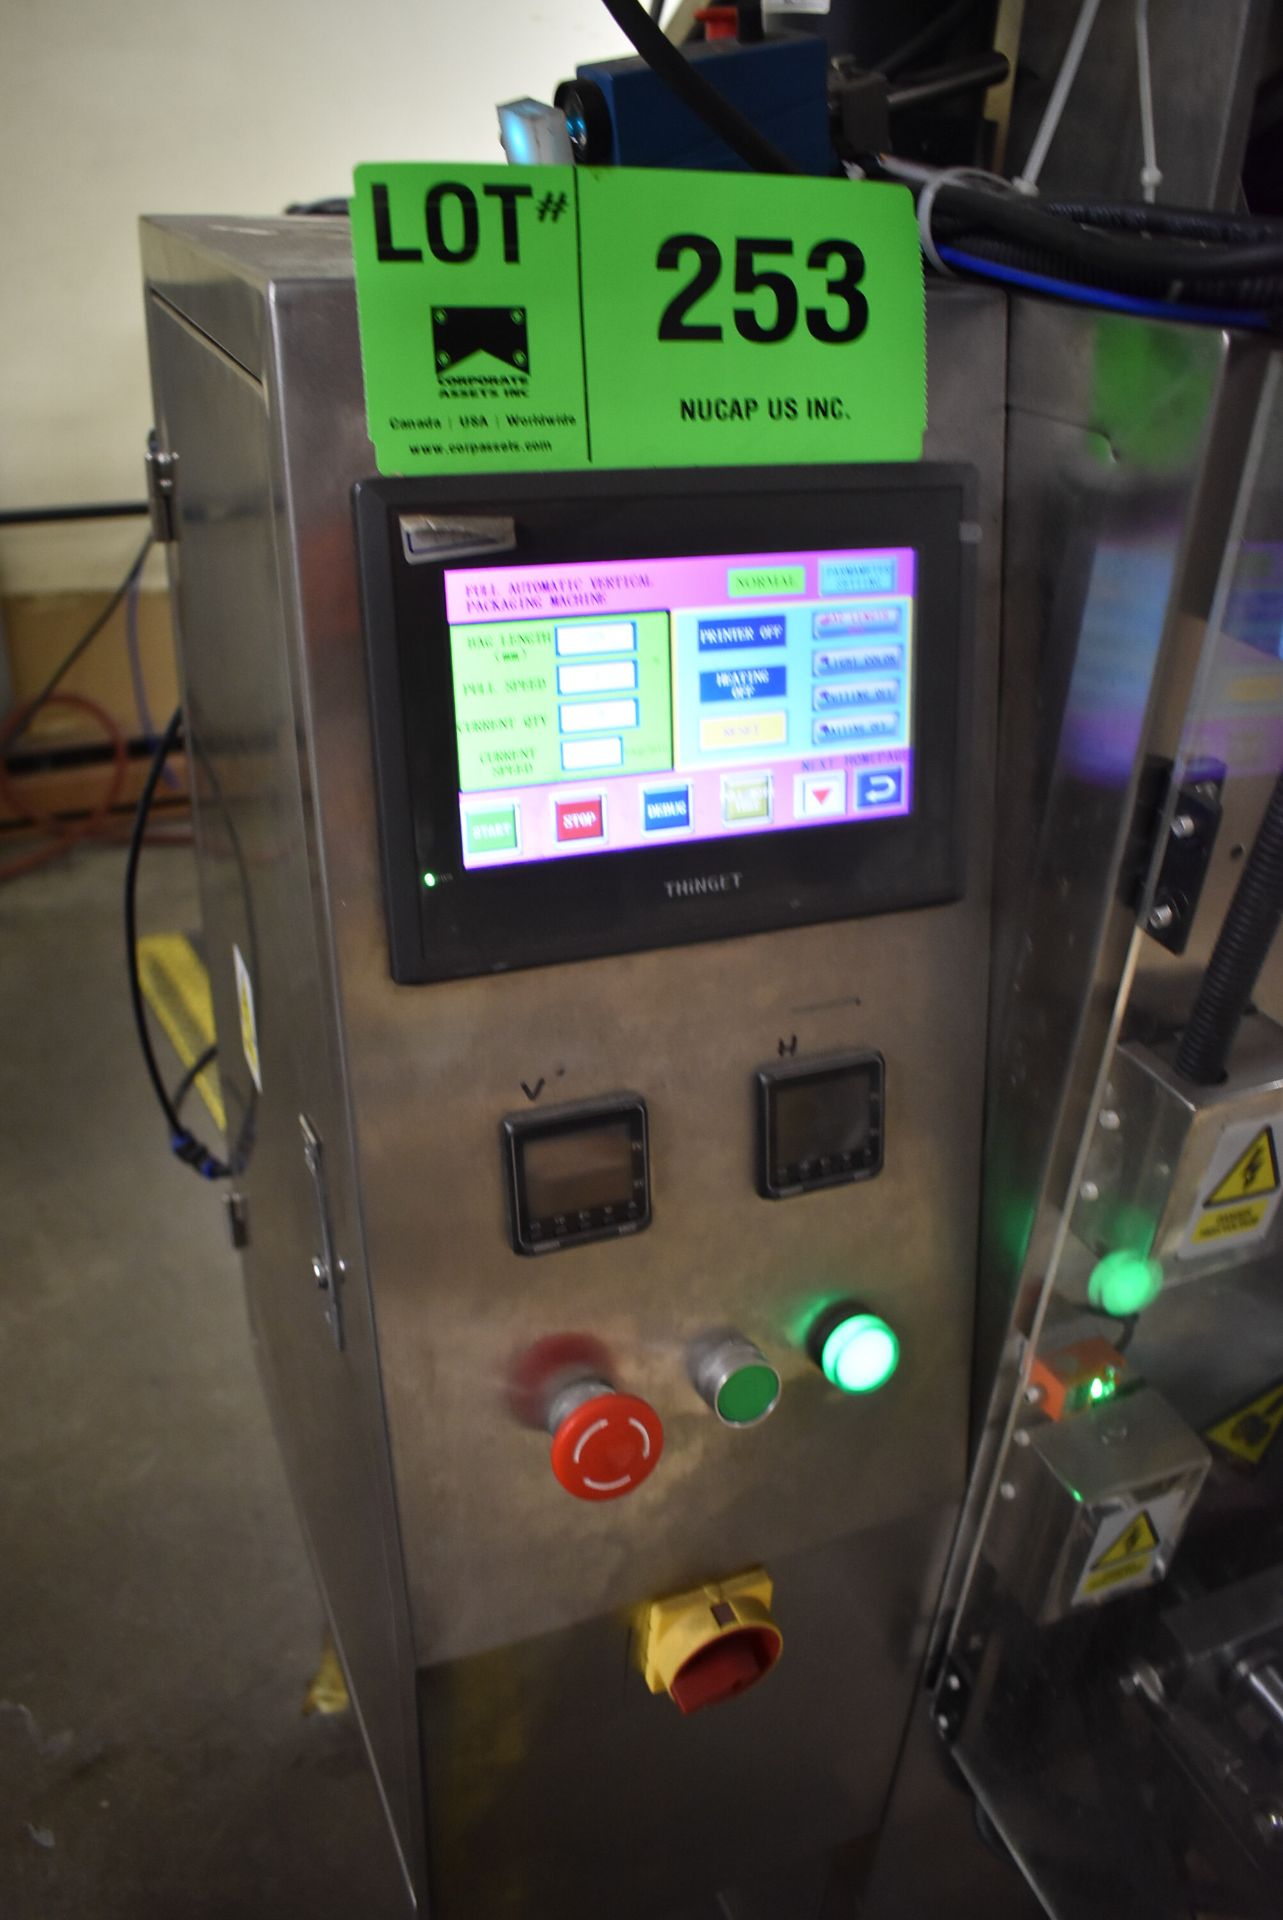 MFG. UNKNOWN STAINLESS STEEL AUTOMATIC BAGGING MACHINE WITH THINGET TOUCH SCREEN CONTROL, S/N: N/ - Image 4 of 9